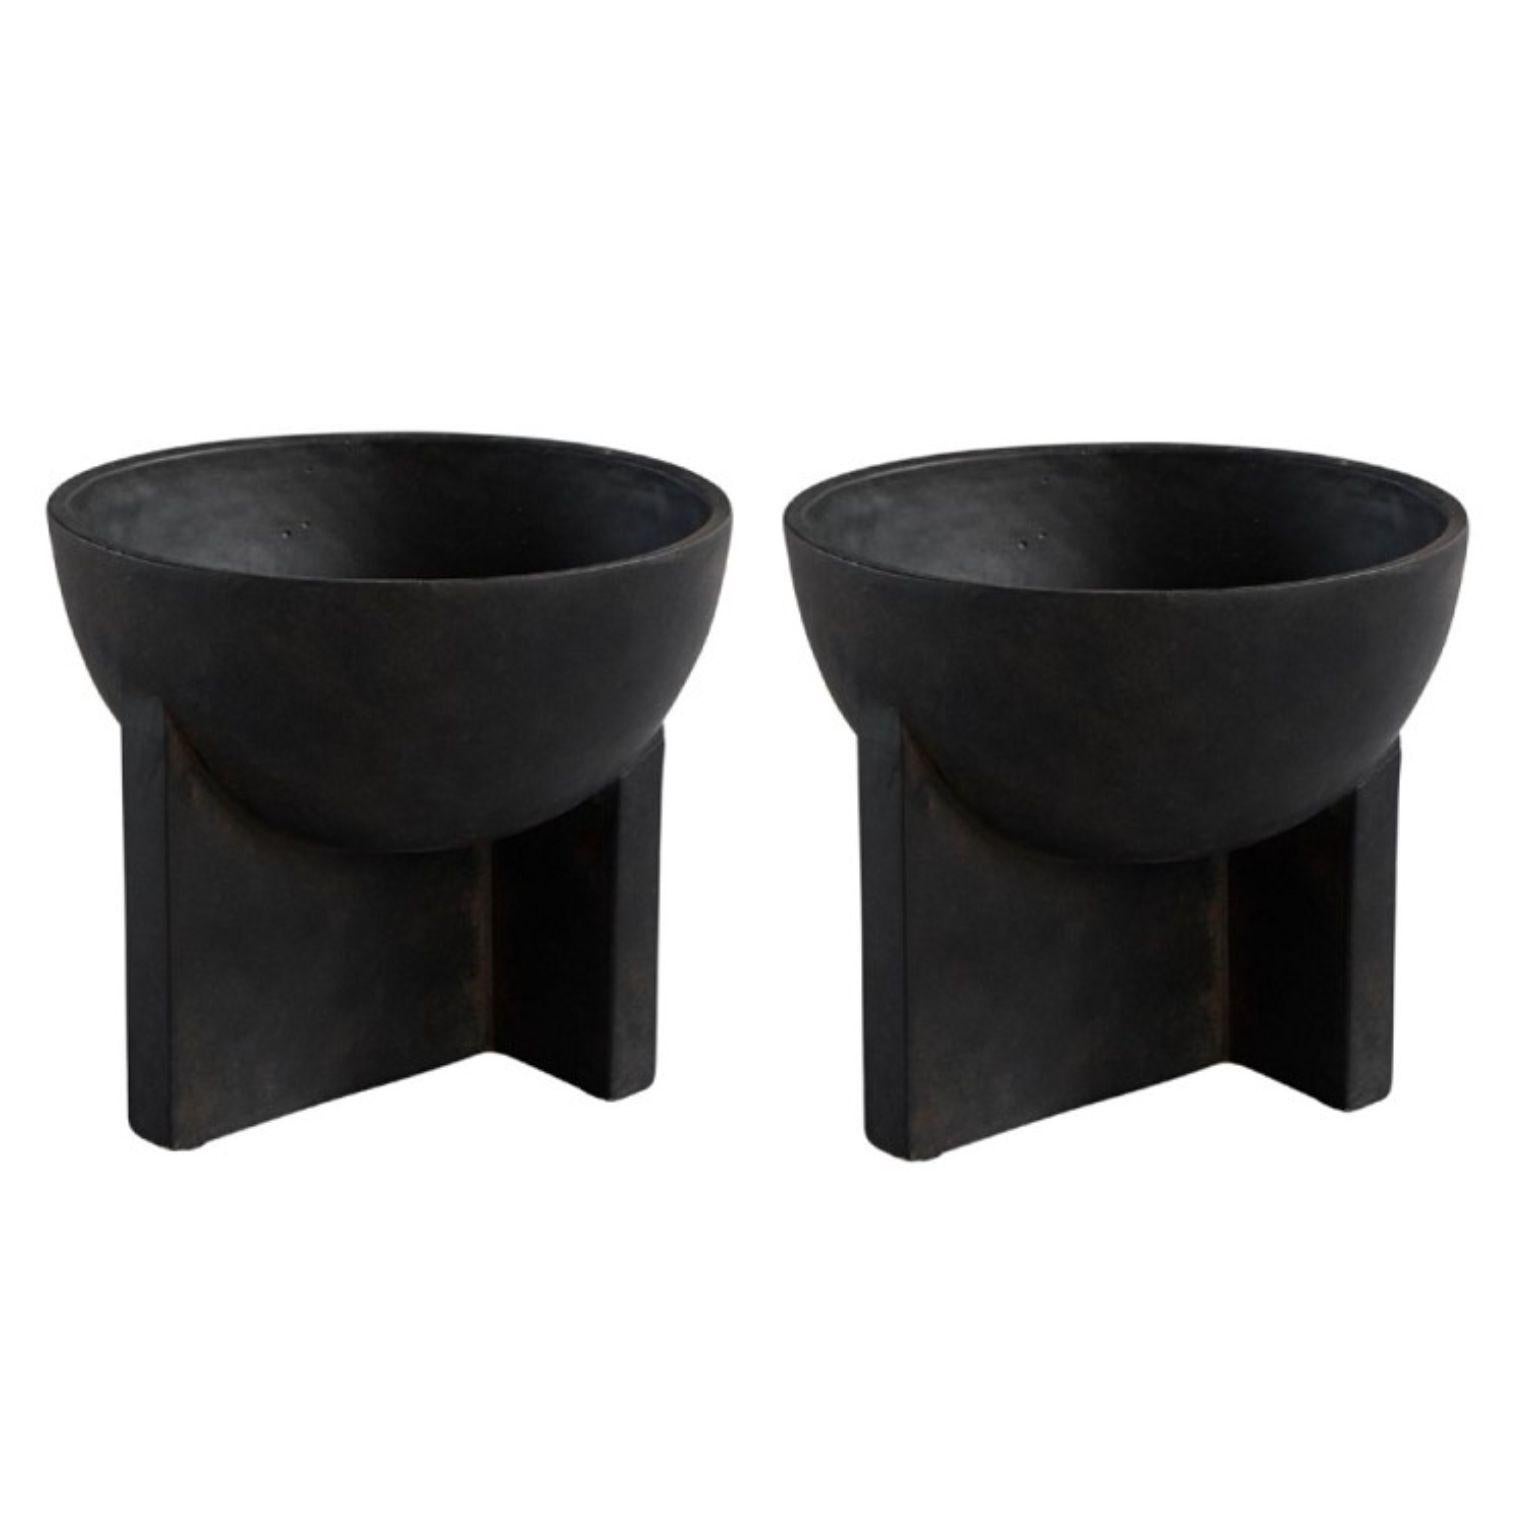 Set of 2 osaka bowls big by 101 Copenhagen
Designed by Nicolaj Nøddesbo & Tommy Hyldahl
Dimensions: L 25 / W 25 / H 22 cm
Materials: Fiber Concrete

Osaka is inspired by ceramic storage objects from Asia. The simplified half sphere shape is